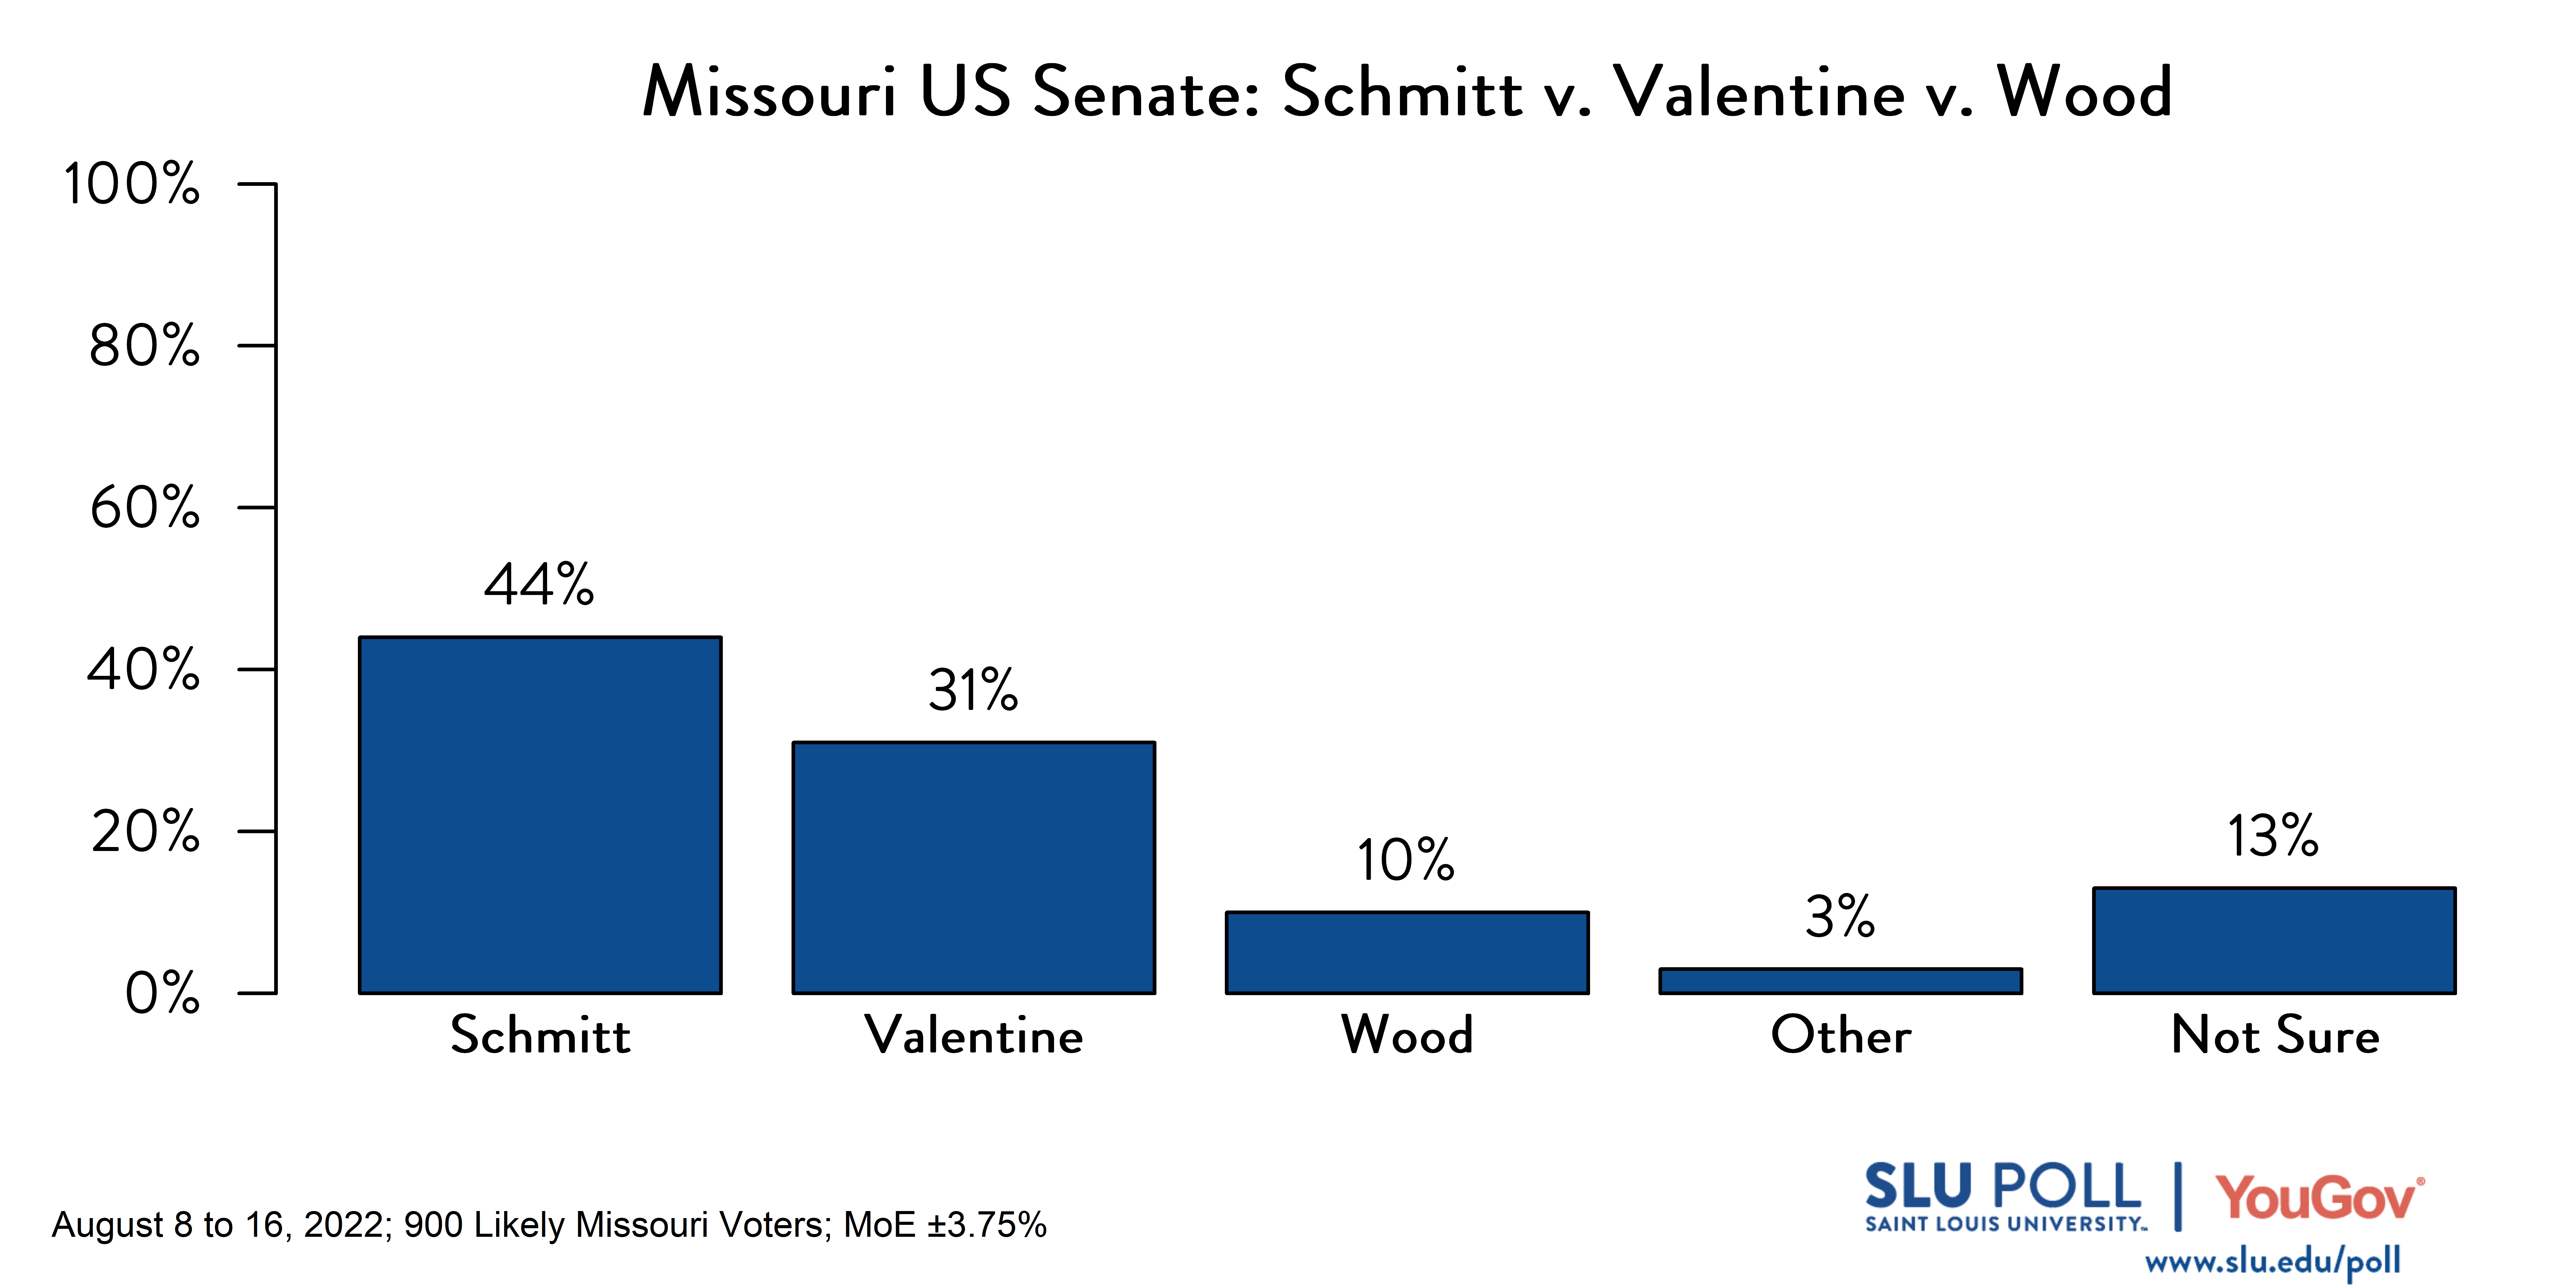 Likely voters' responses to 'Recently, Independent candidate John Wood filed signatures seeking to qualify to be on the ballot for U.S. Senator in Missouri. Now adding John Wood to the list of candidates for U.S. Senator in Missouri, who would you vote for?': 44% Eric Schmitt (R), 31% Trudy Busch Valentine (D), 10% John Wood (Independent Candidate), 3% Other, and 13% Not sure. 